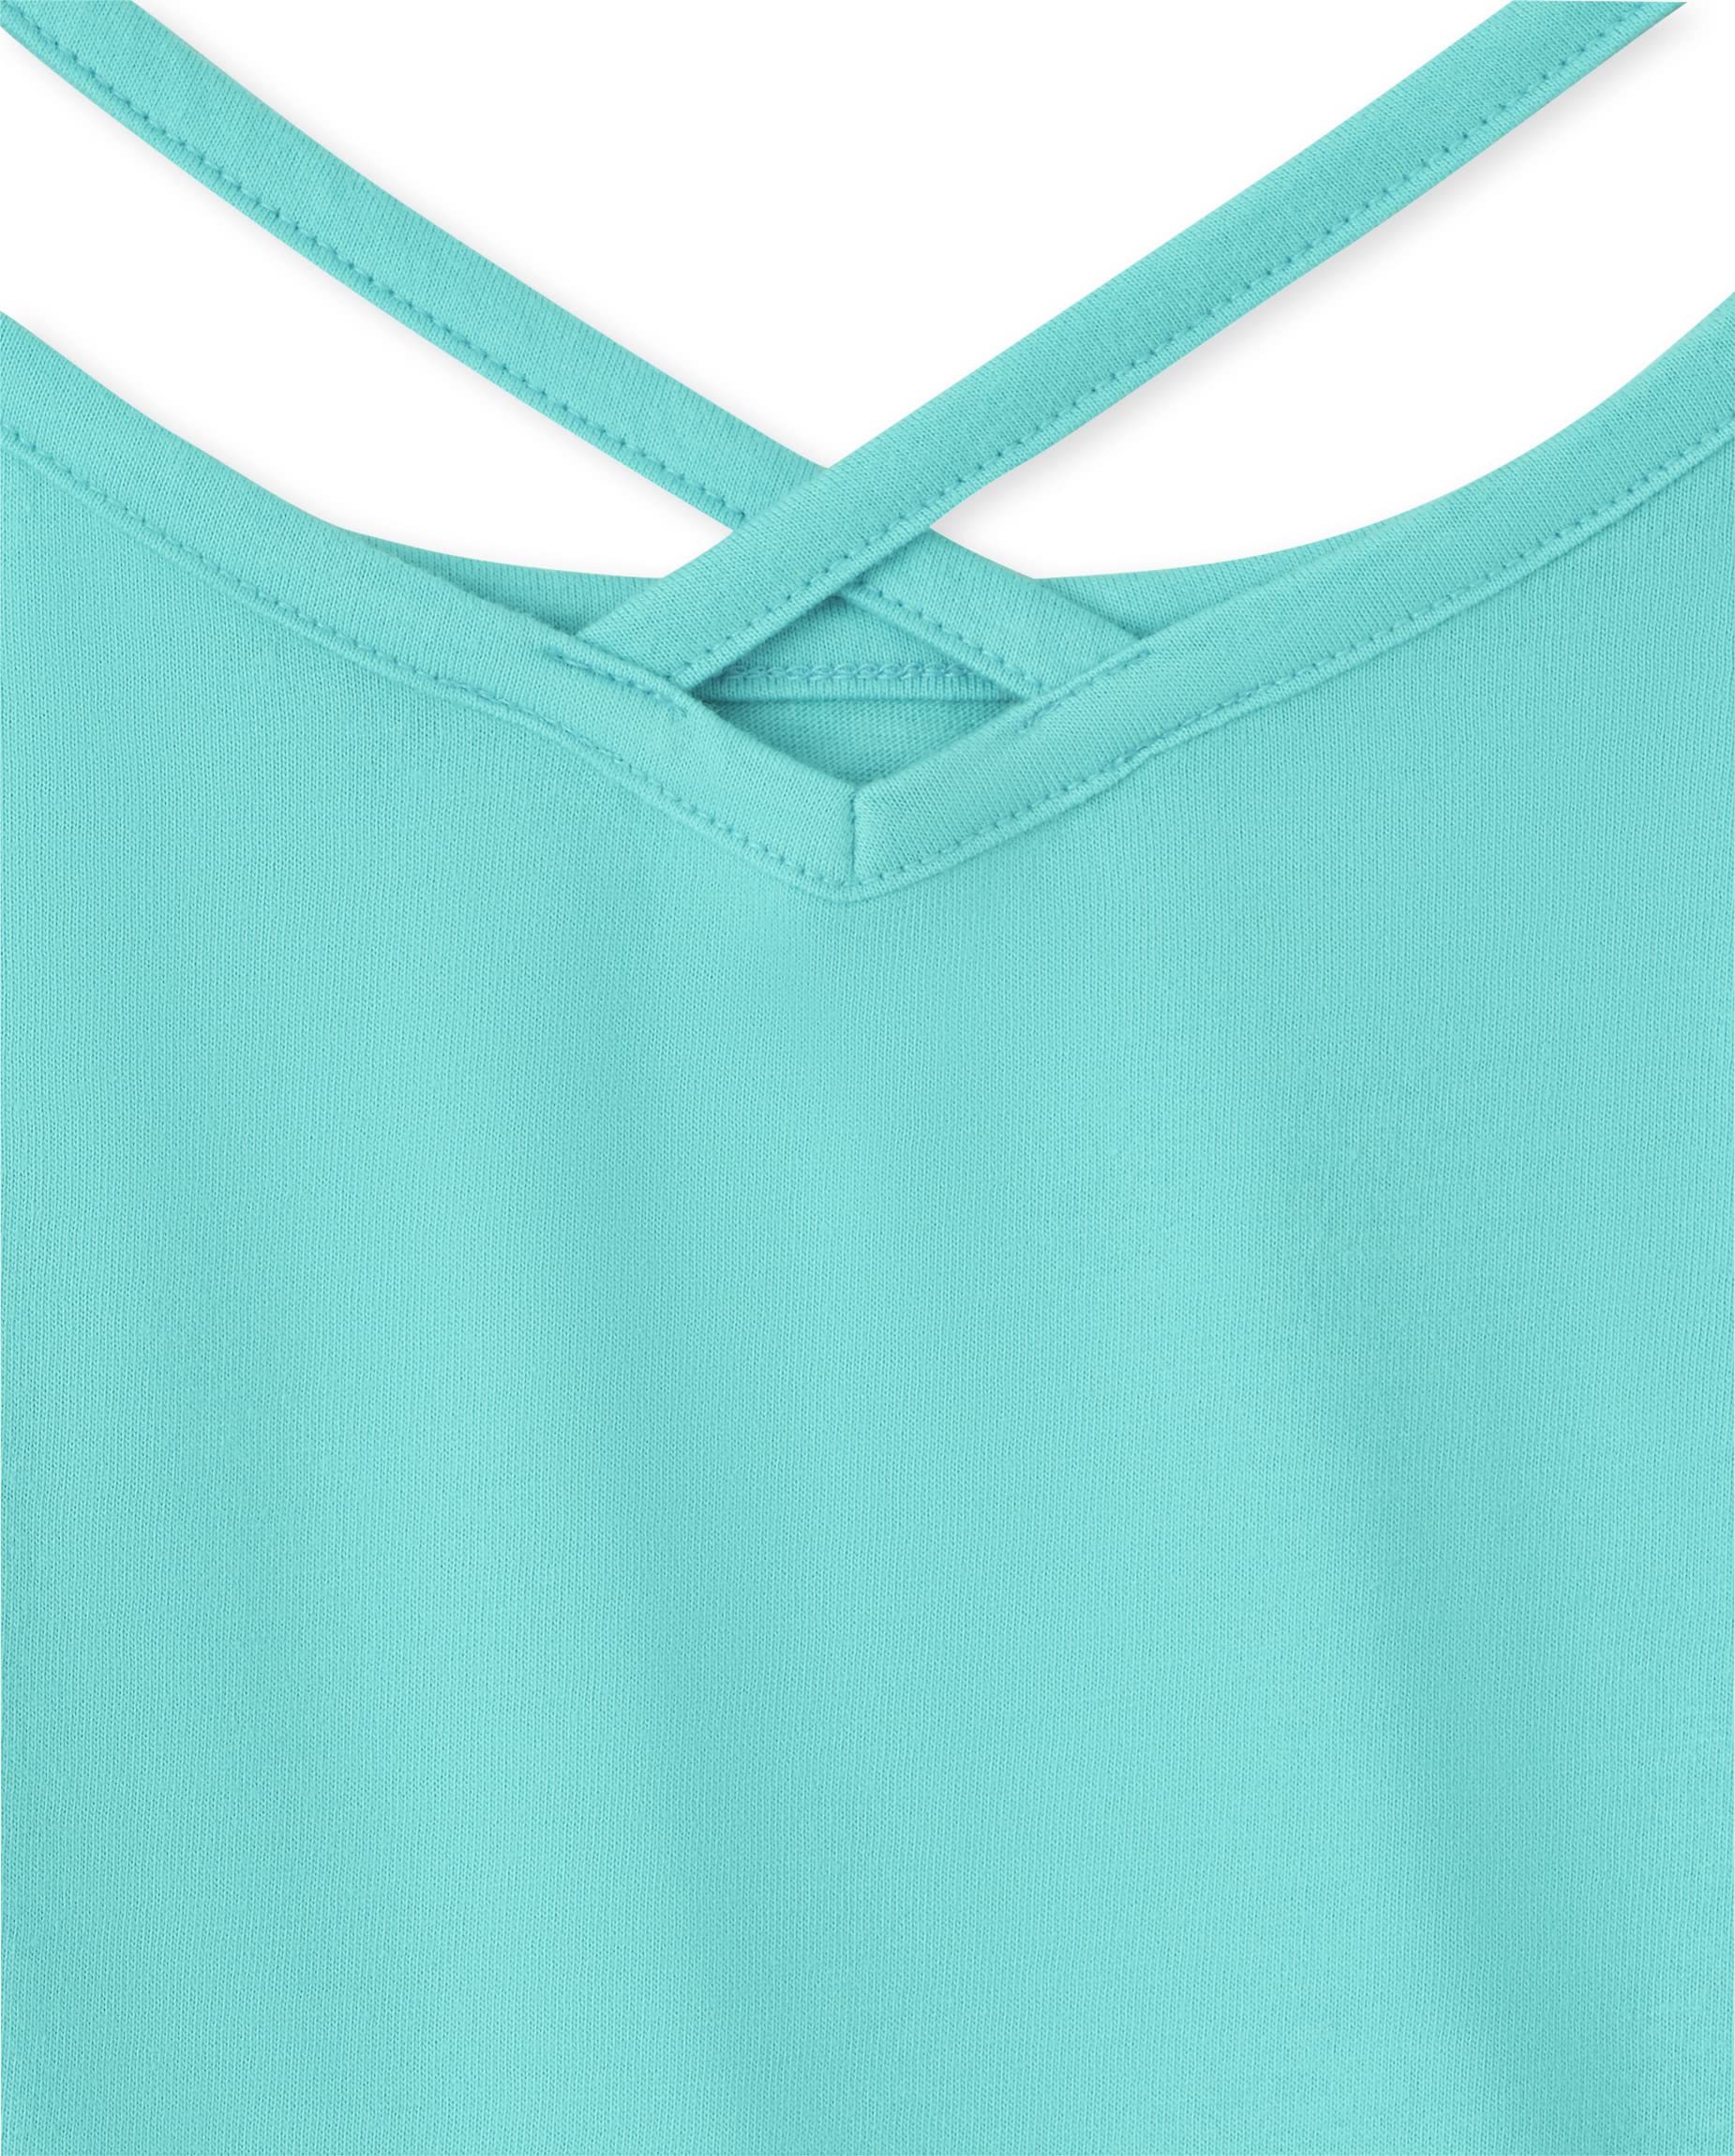 The Children's Place Girls Off Shoulder Top